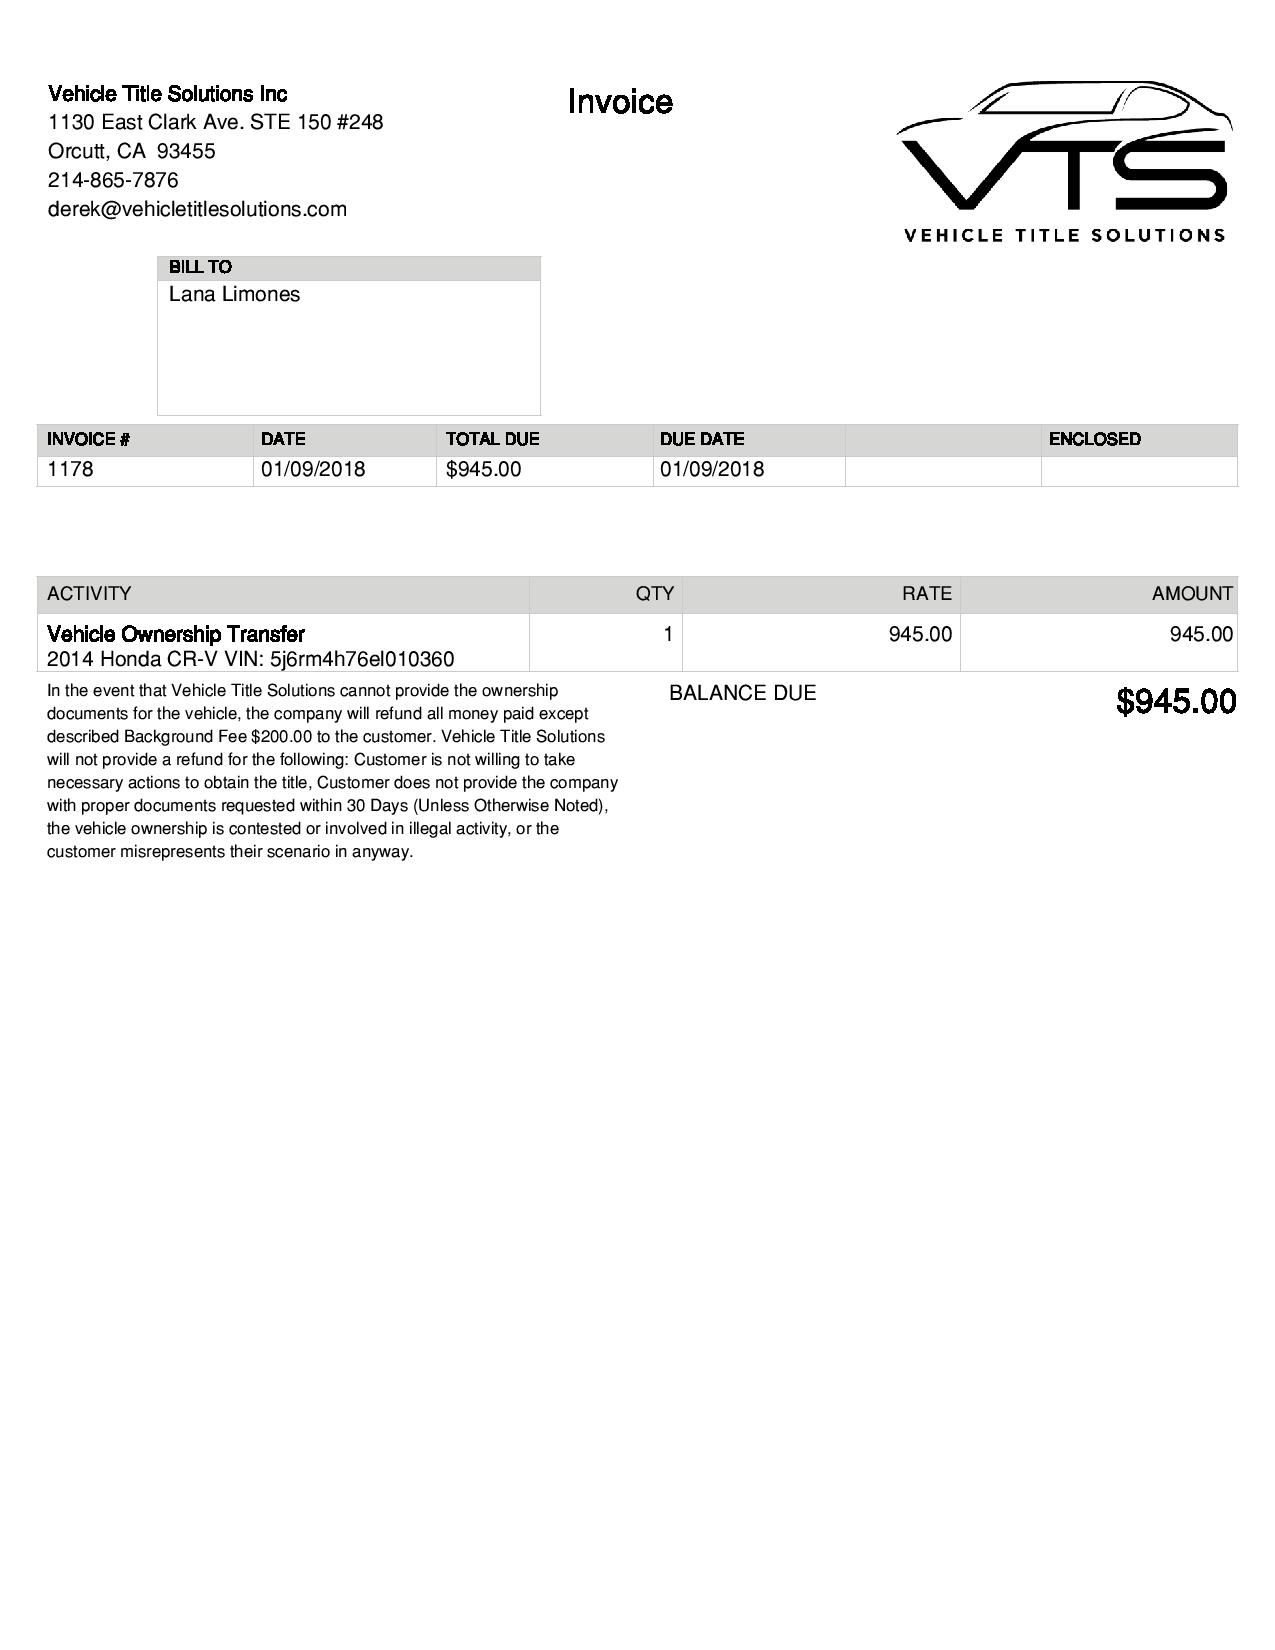 actual invoice from vehicle title soultions